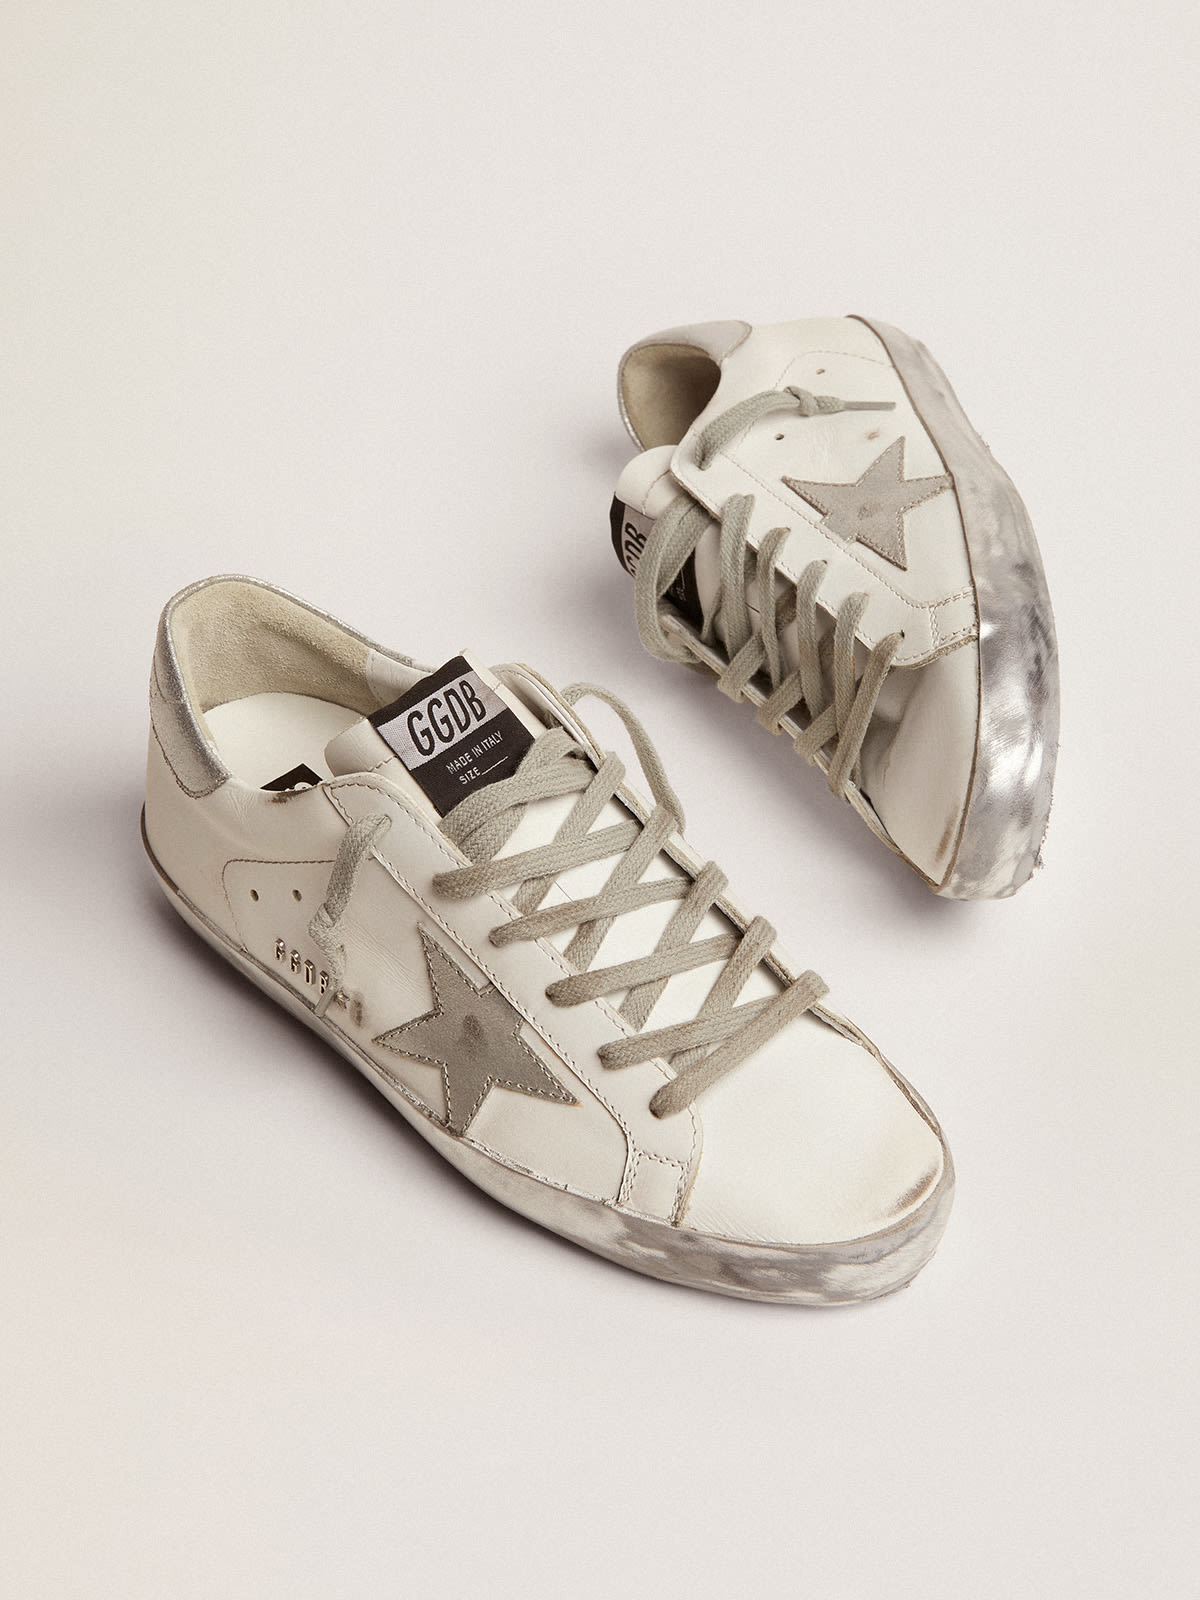 Golden Goose - Sneakers Super-Star mit Sparkle-Foxing in Silber und Metal Studs-Lettering in 